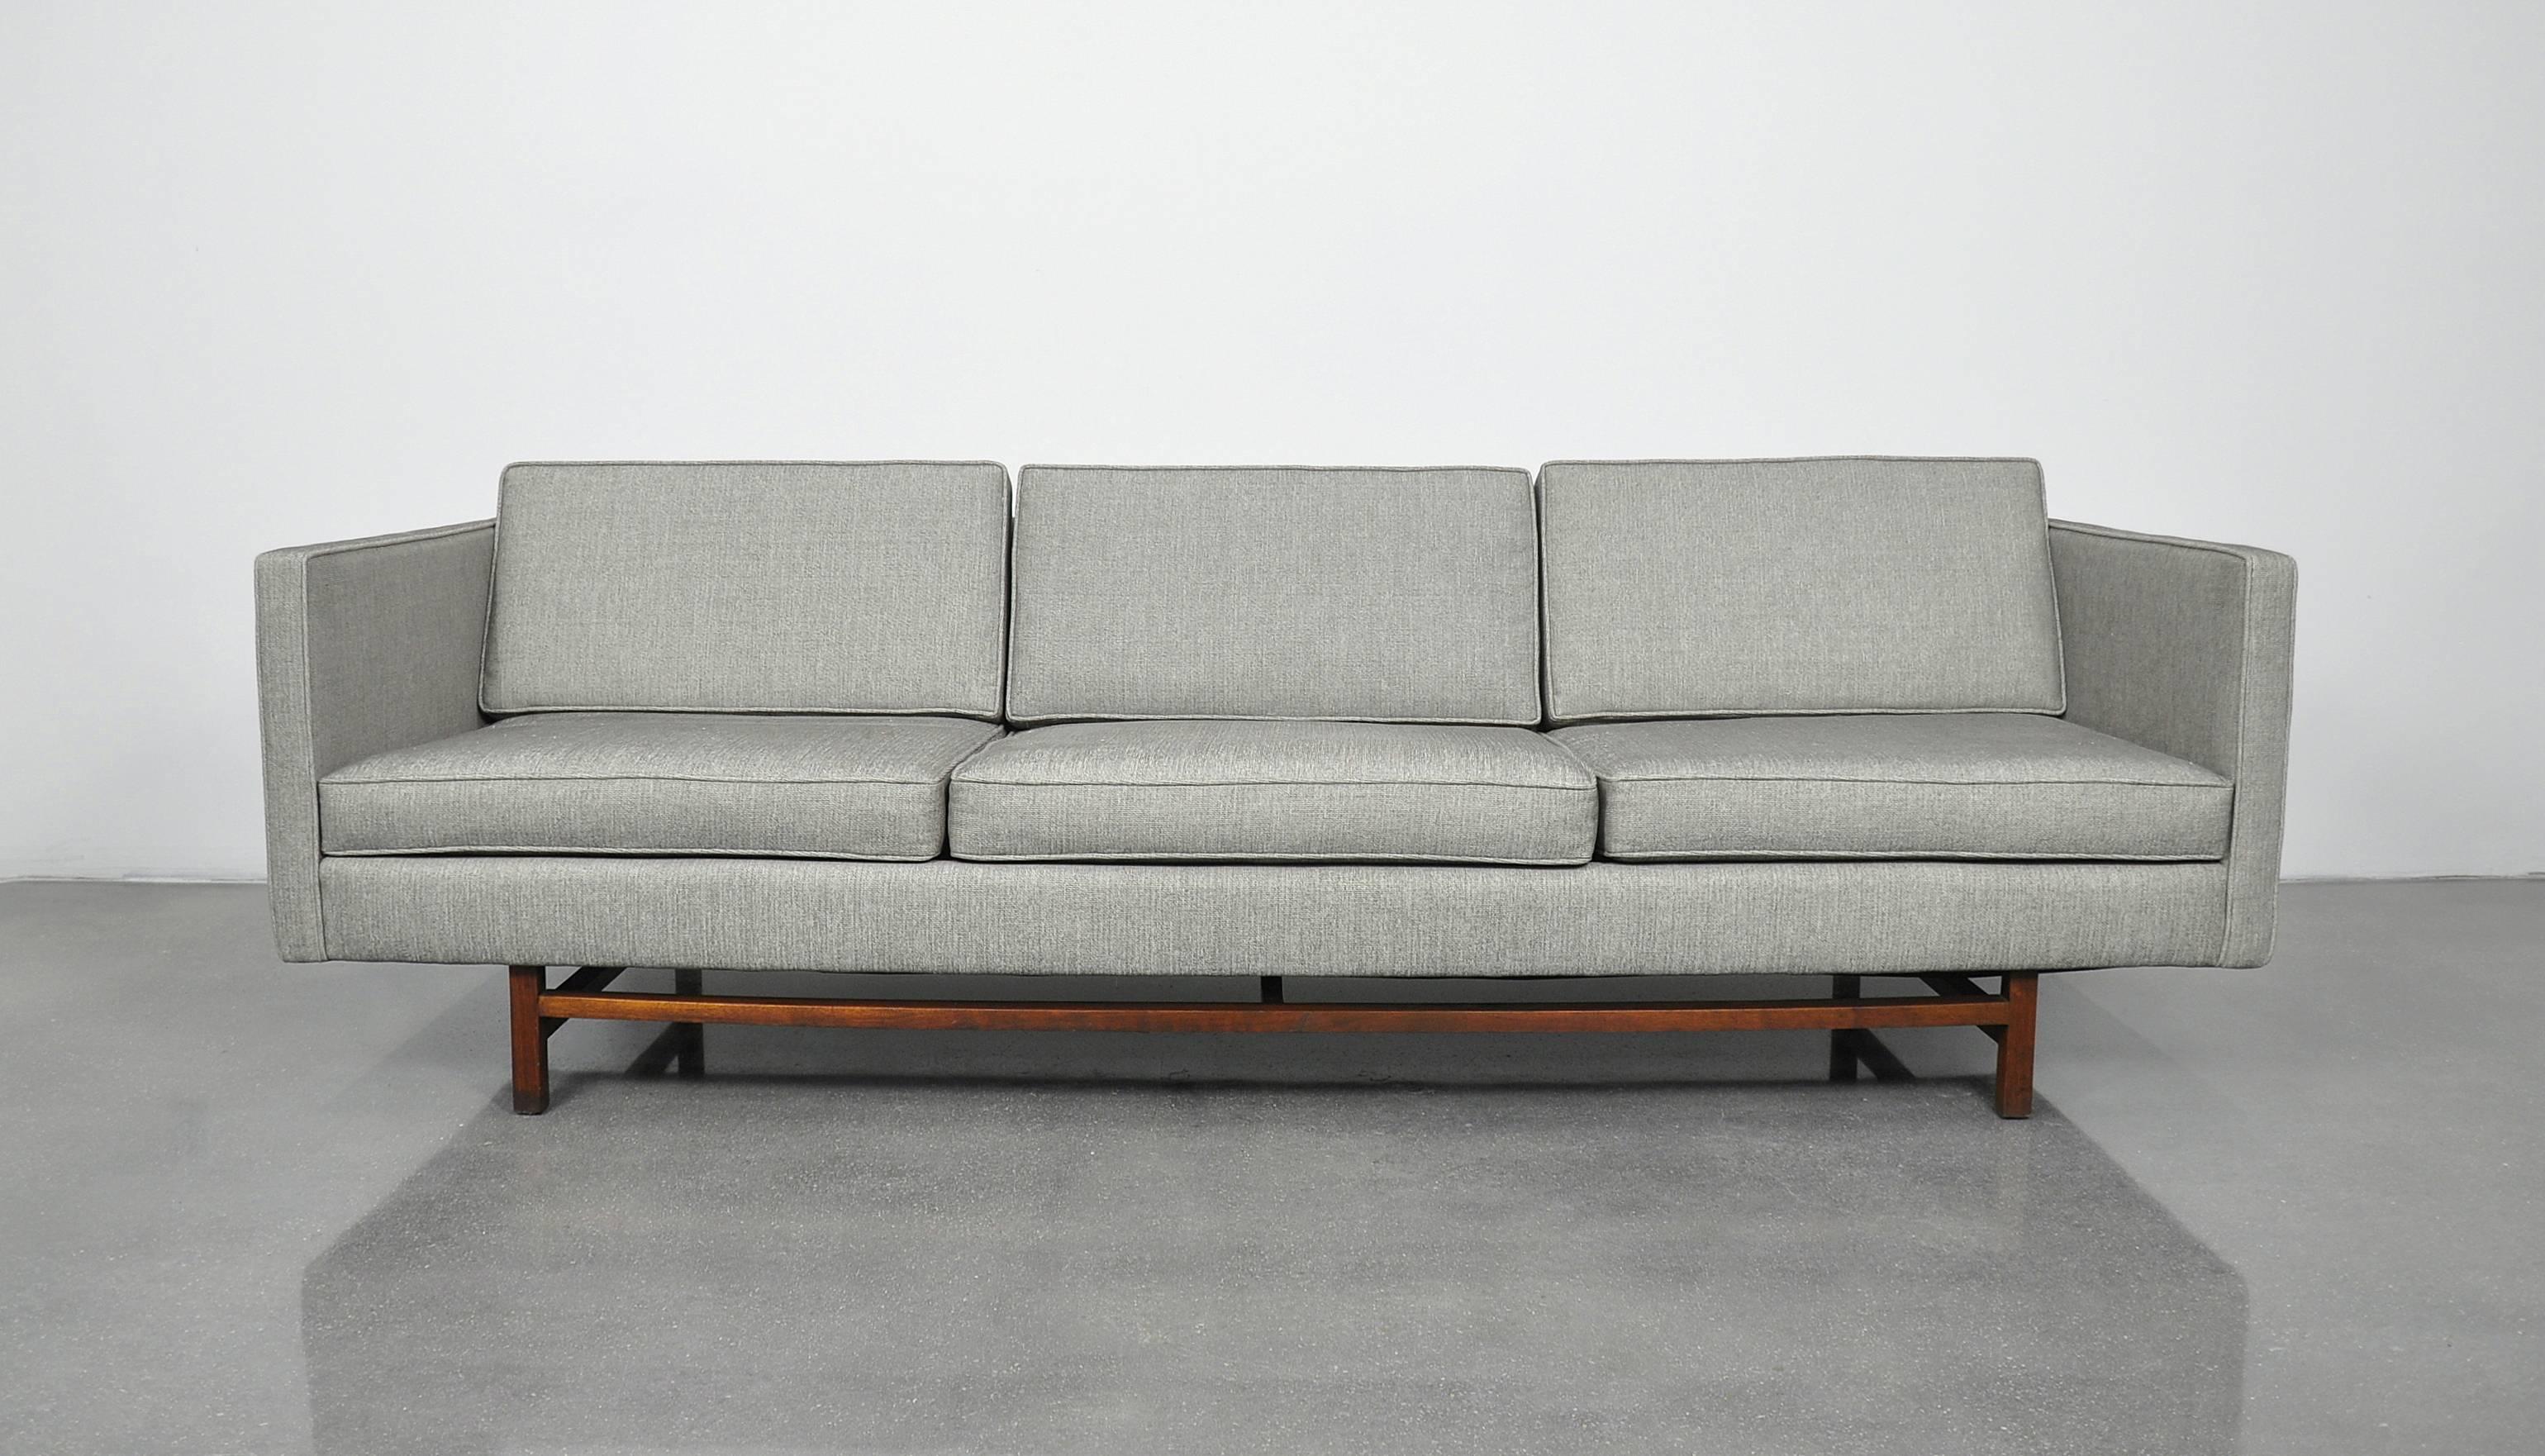 This reupholstered grey vintage sofa is a beautiful Mid-Century Modern example modeled in the style of Harvey Probber, and dating from the 1950s. The couch features a long and simple profile with walnut legs joined by stretchers. The sofa has